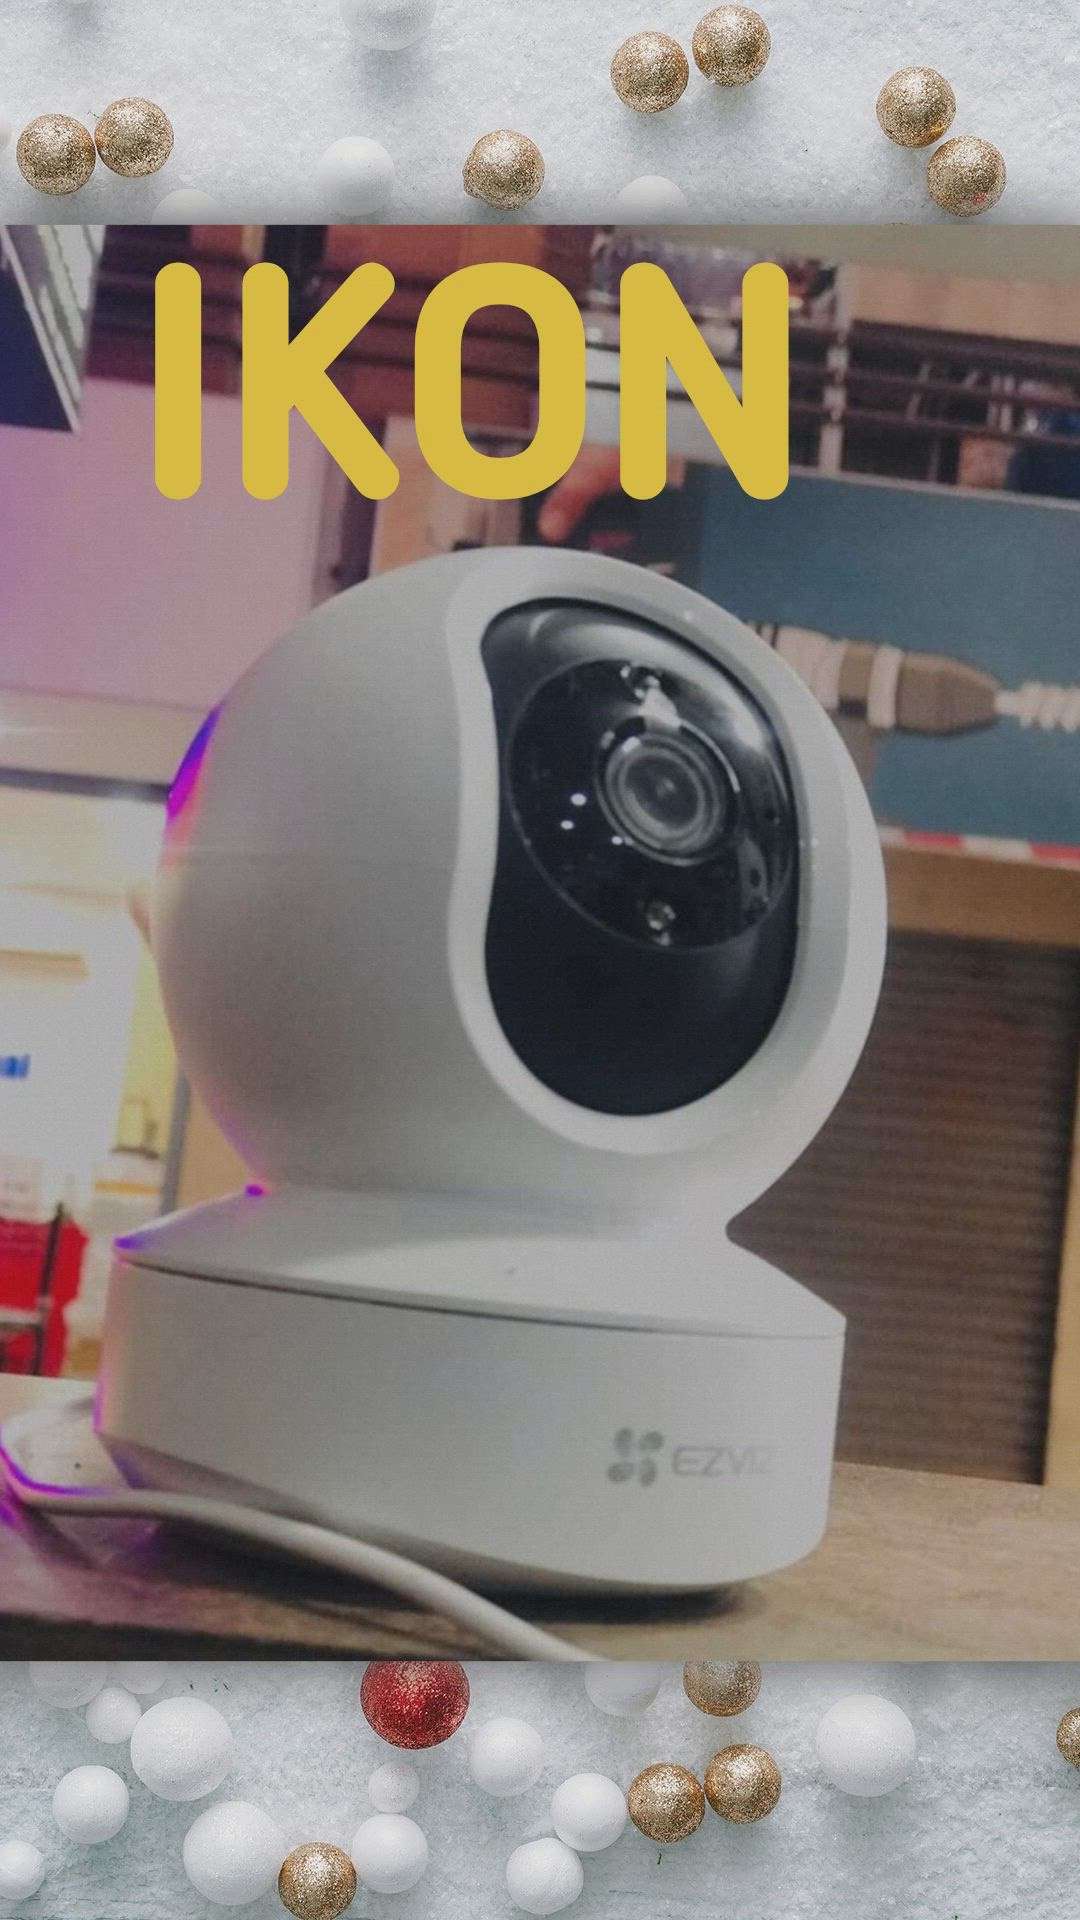 IKON all types security systems available